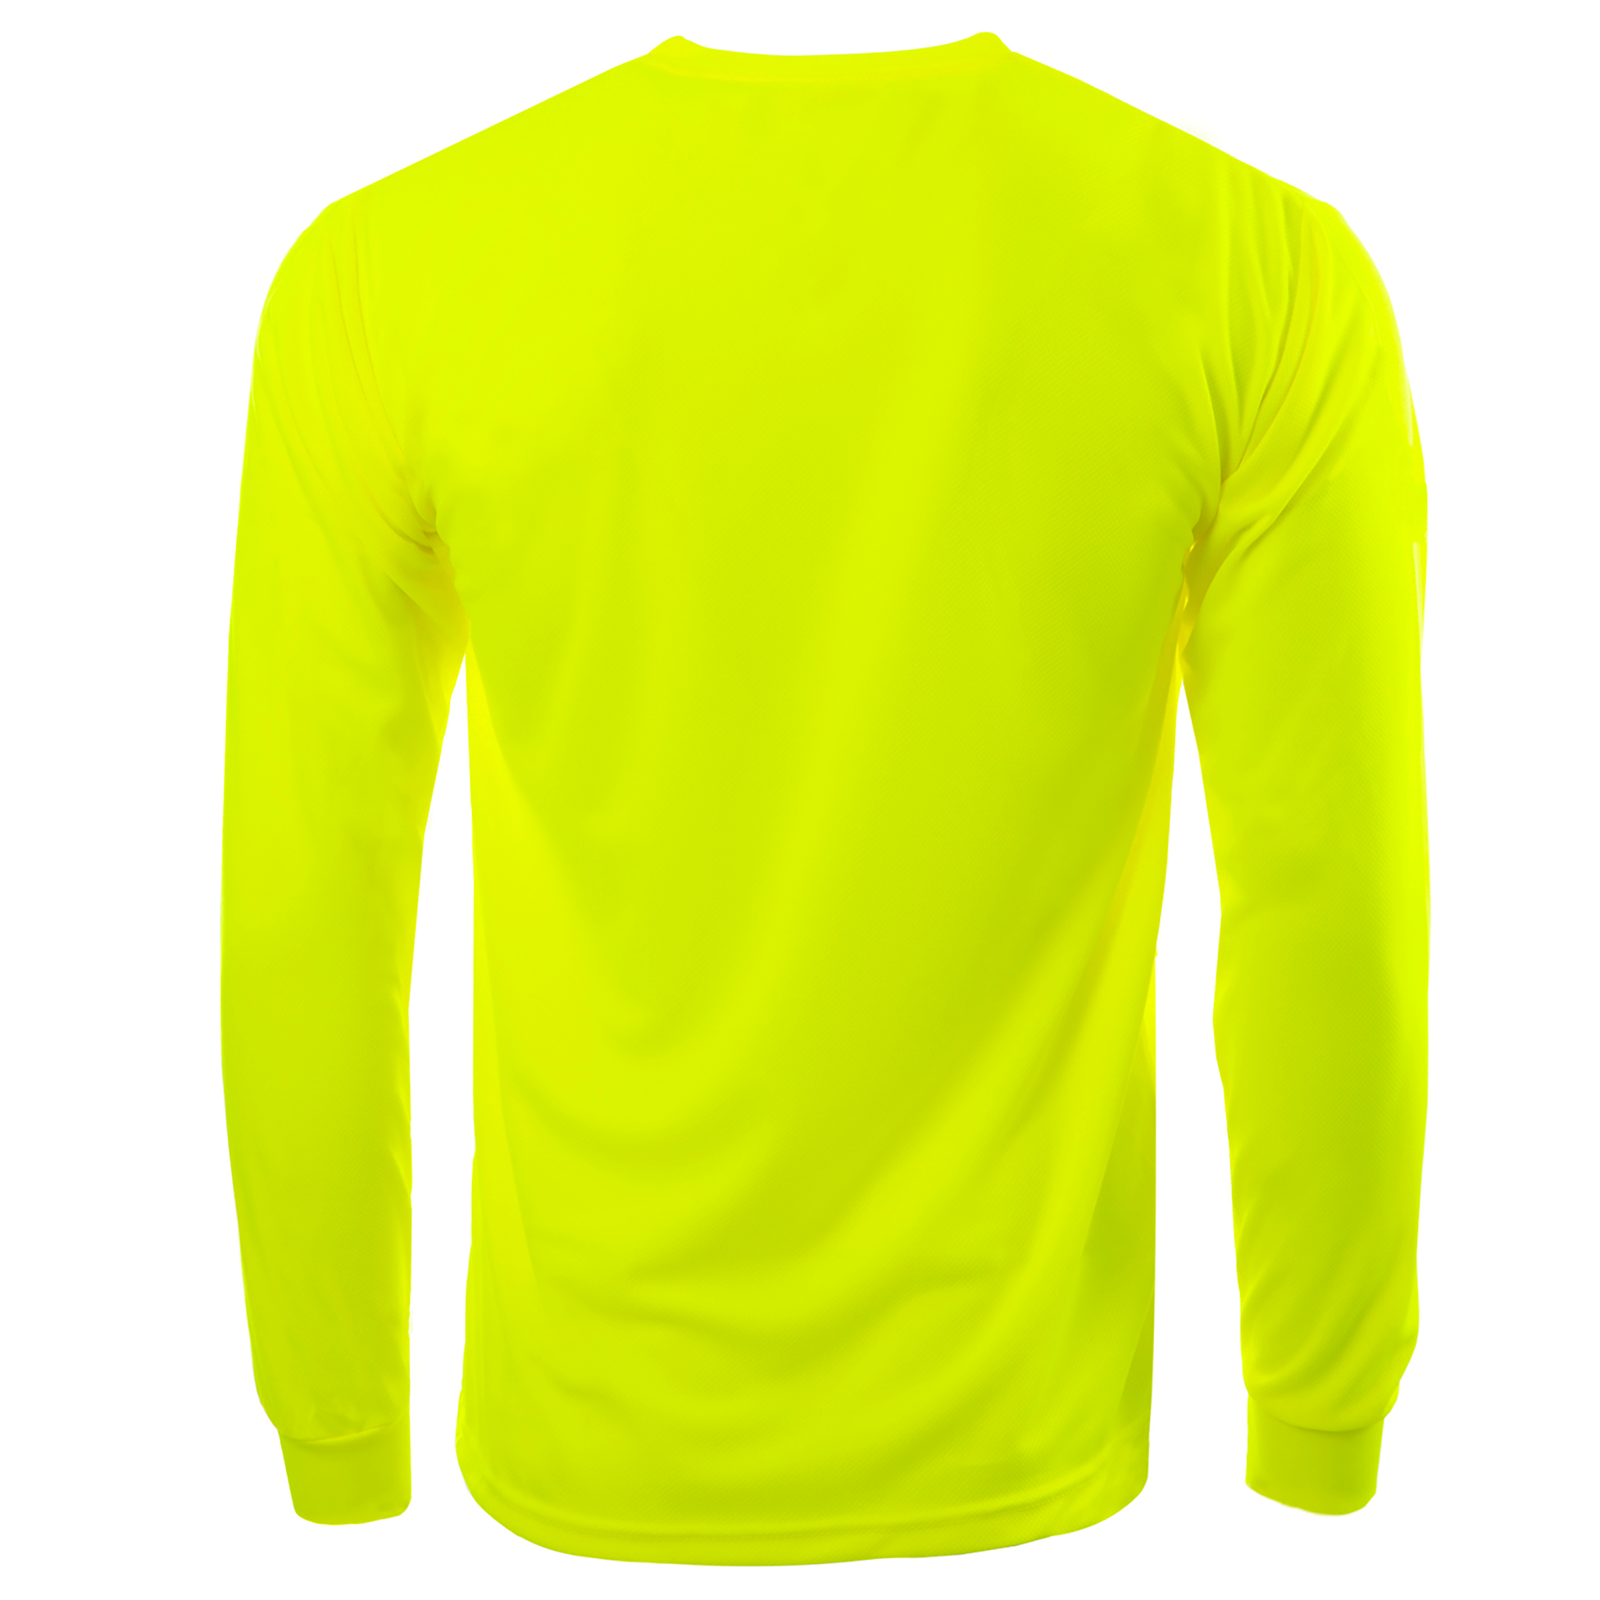 Tops, Crewneck, XS, High Visibility, Safety, L, Short Sleeves